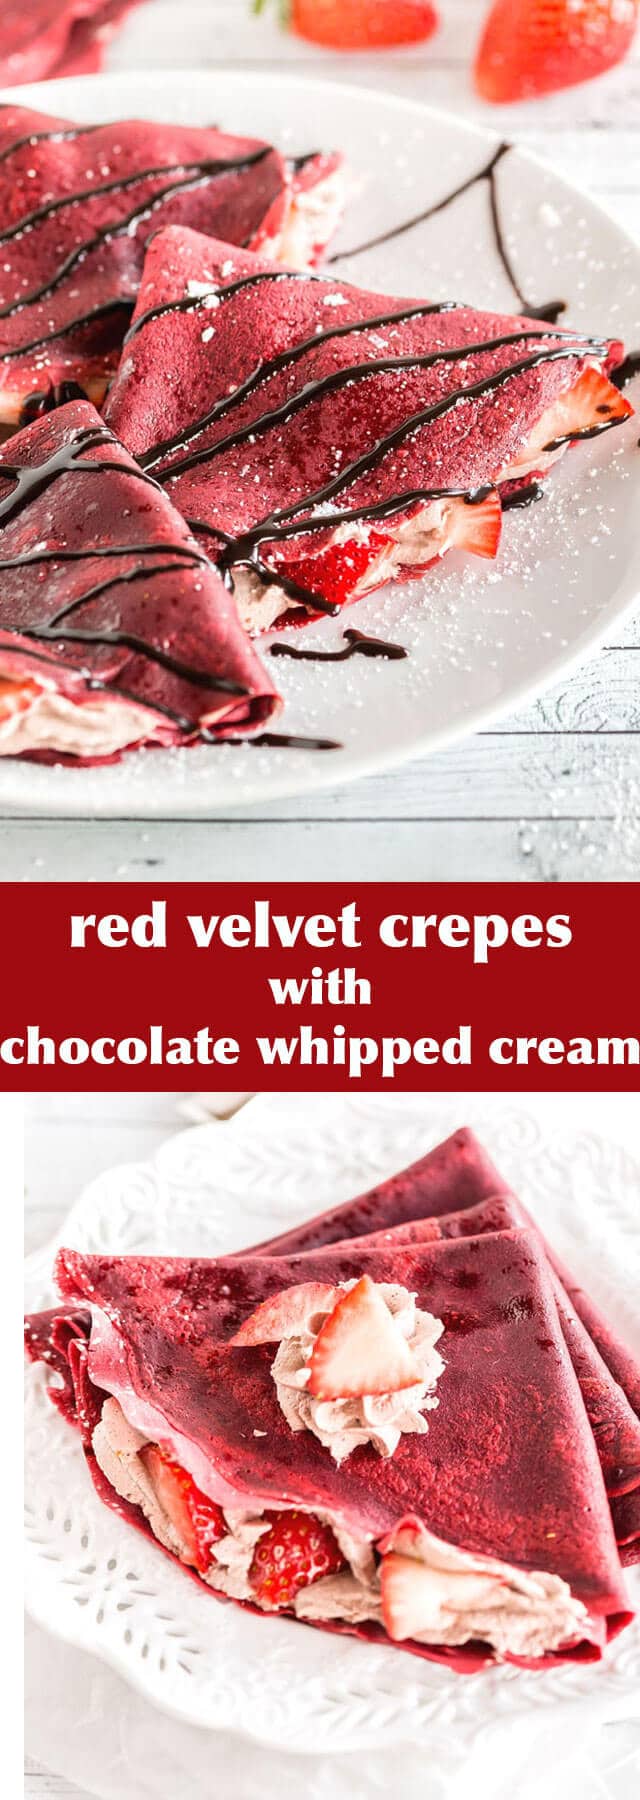 red-velvet-crepes-with-chocolate-whipped-cream